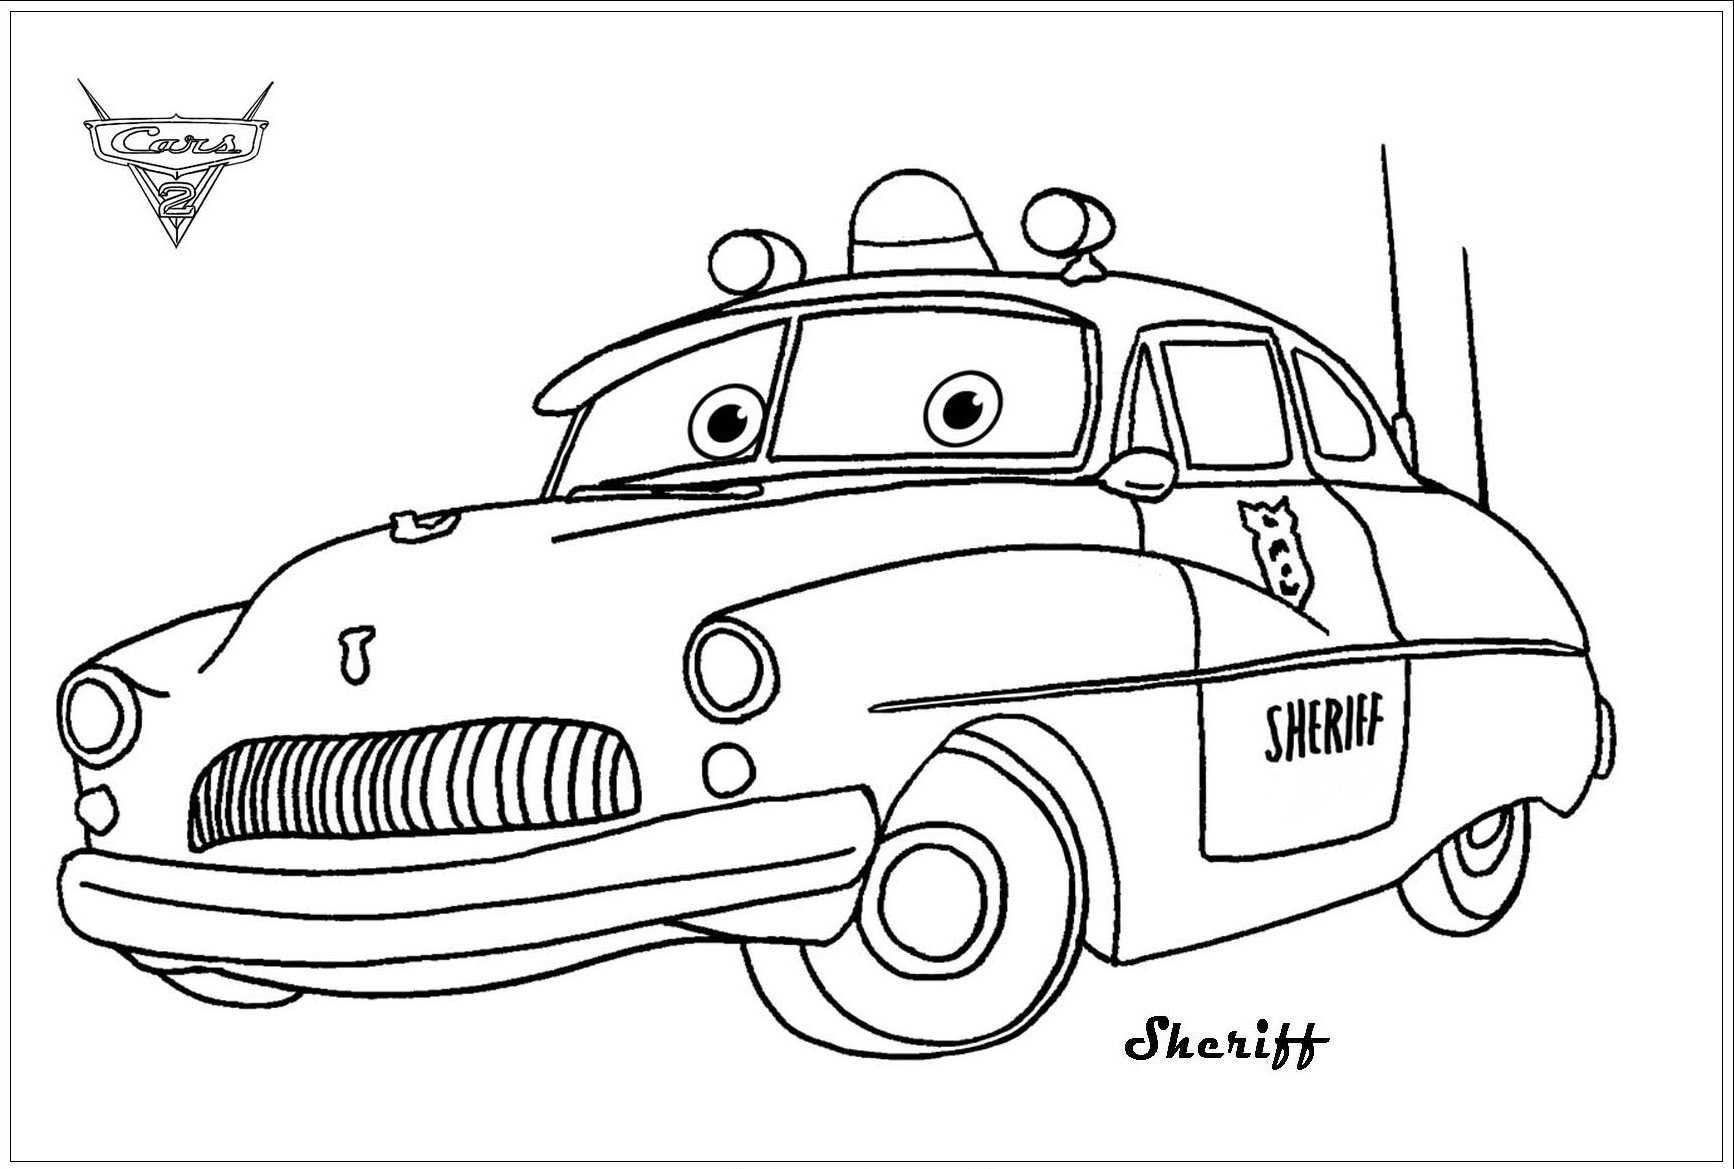 Sheriff, beautiful car from Cars 2 by Disney / Pixar. Embodying authority in Radiator Springs, Sheriff nails Flash during a speeding ticket after a car chase.